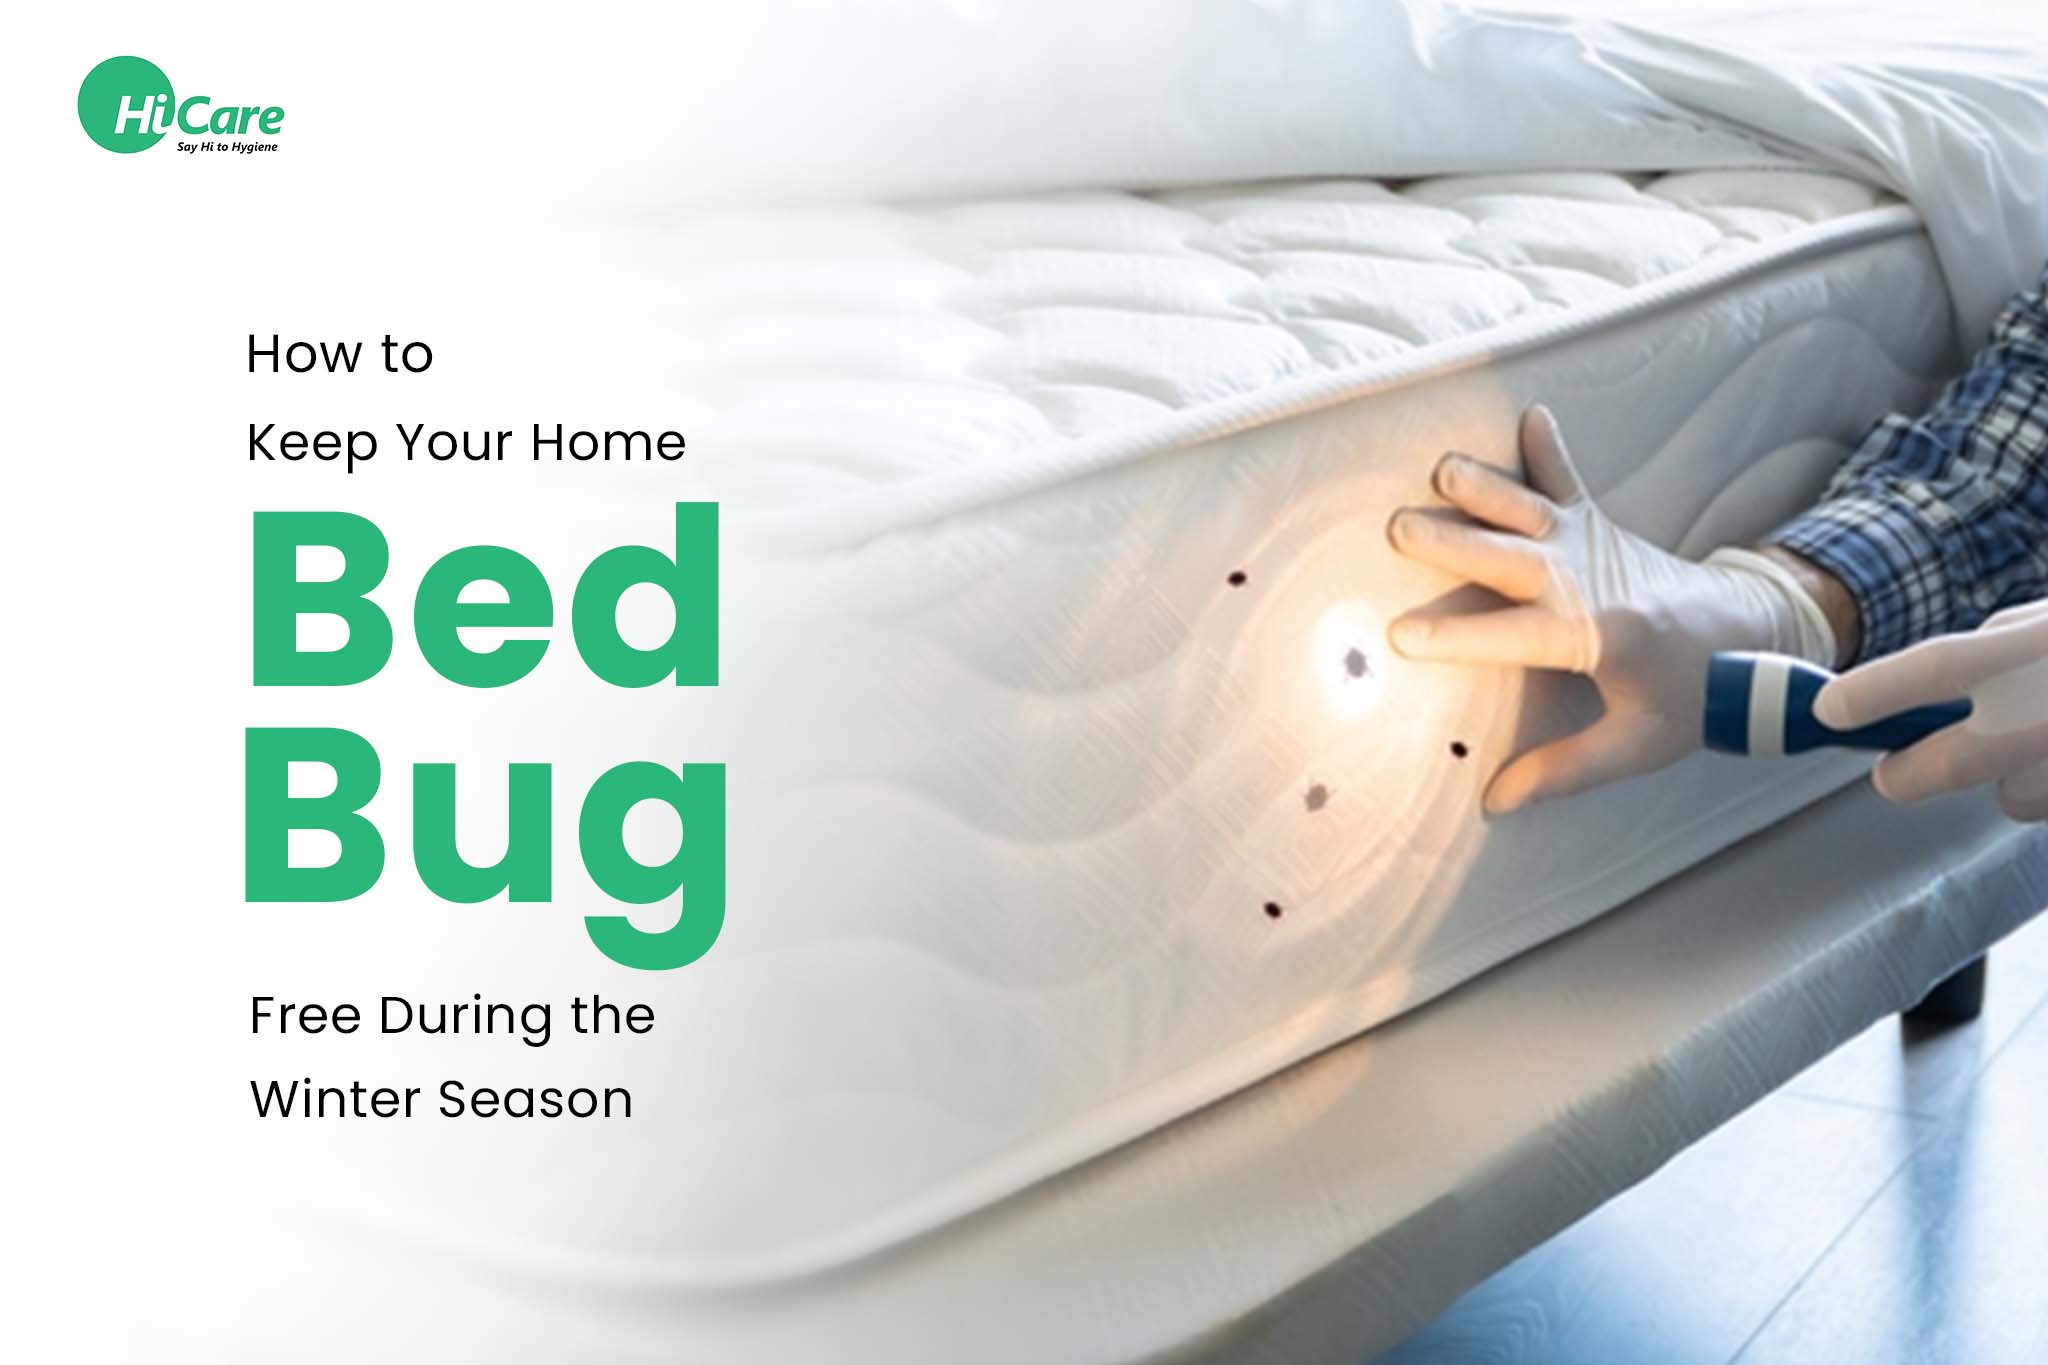 how to keep your home bed bug free during winter season